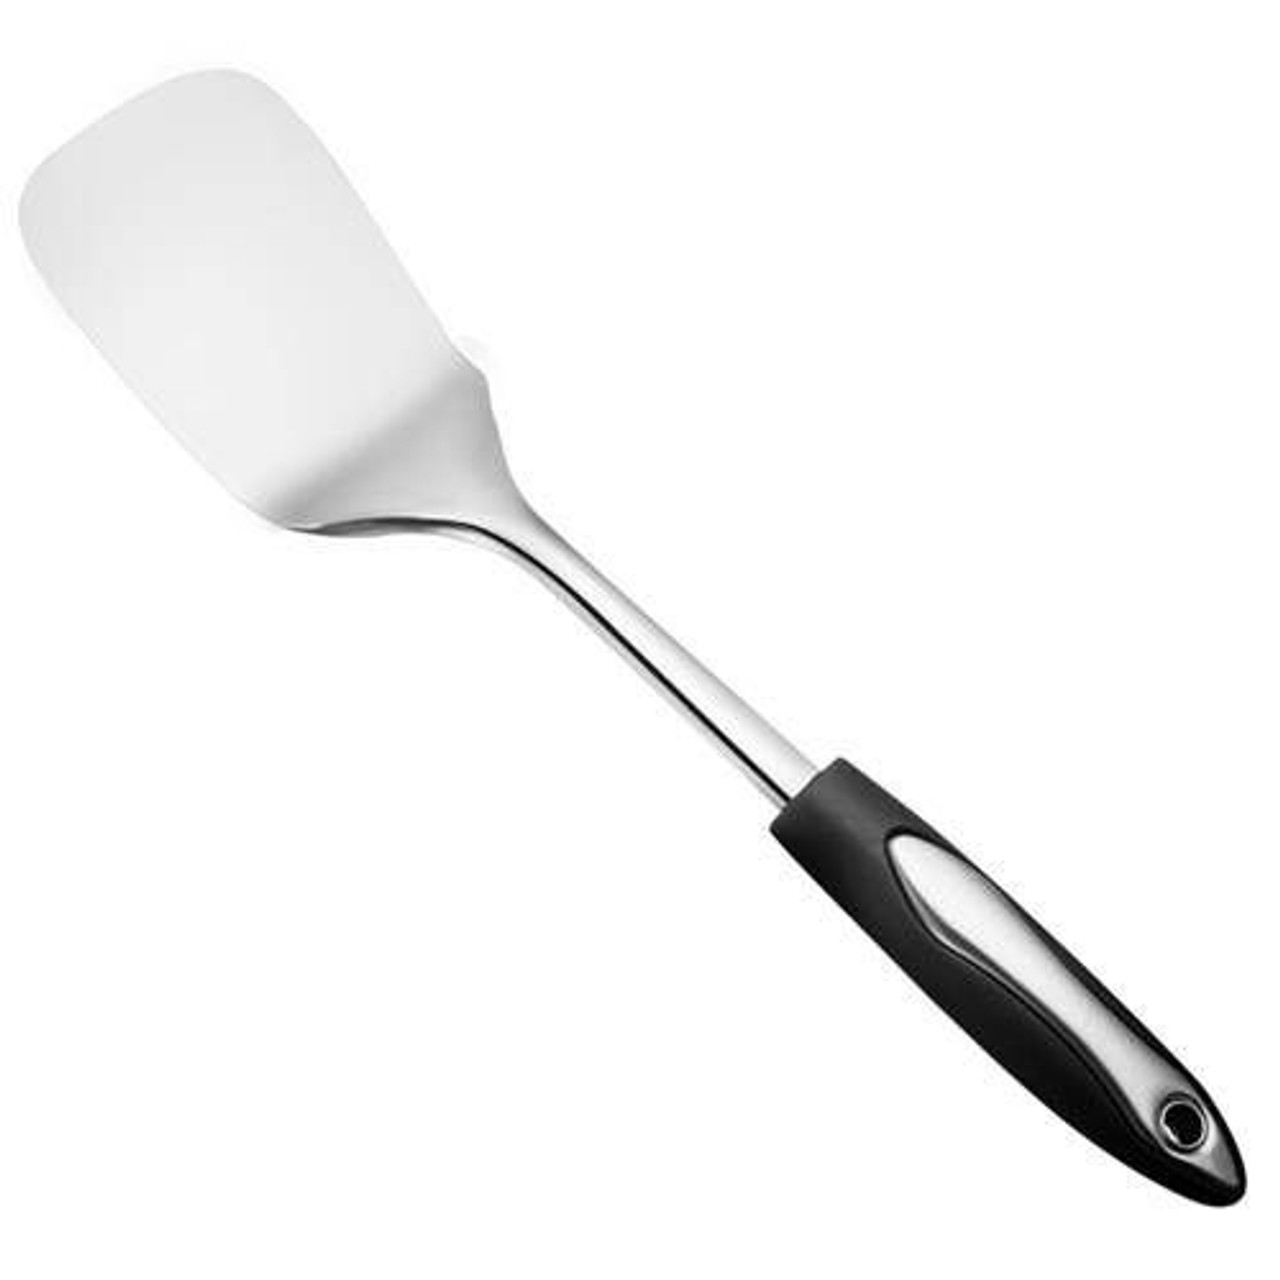 https://cdn11.bigcommerce.com/s-q0oajb576s/images/stencil/1280x1280/products/1312/3614/solid-spatulas-culinary-edge-premium-quality-stainless-steel-with-sure-grip-handles-14__09400.1637184331.jpg?c=1